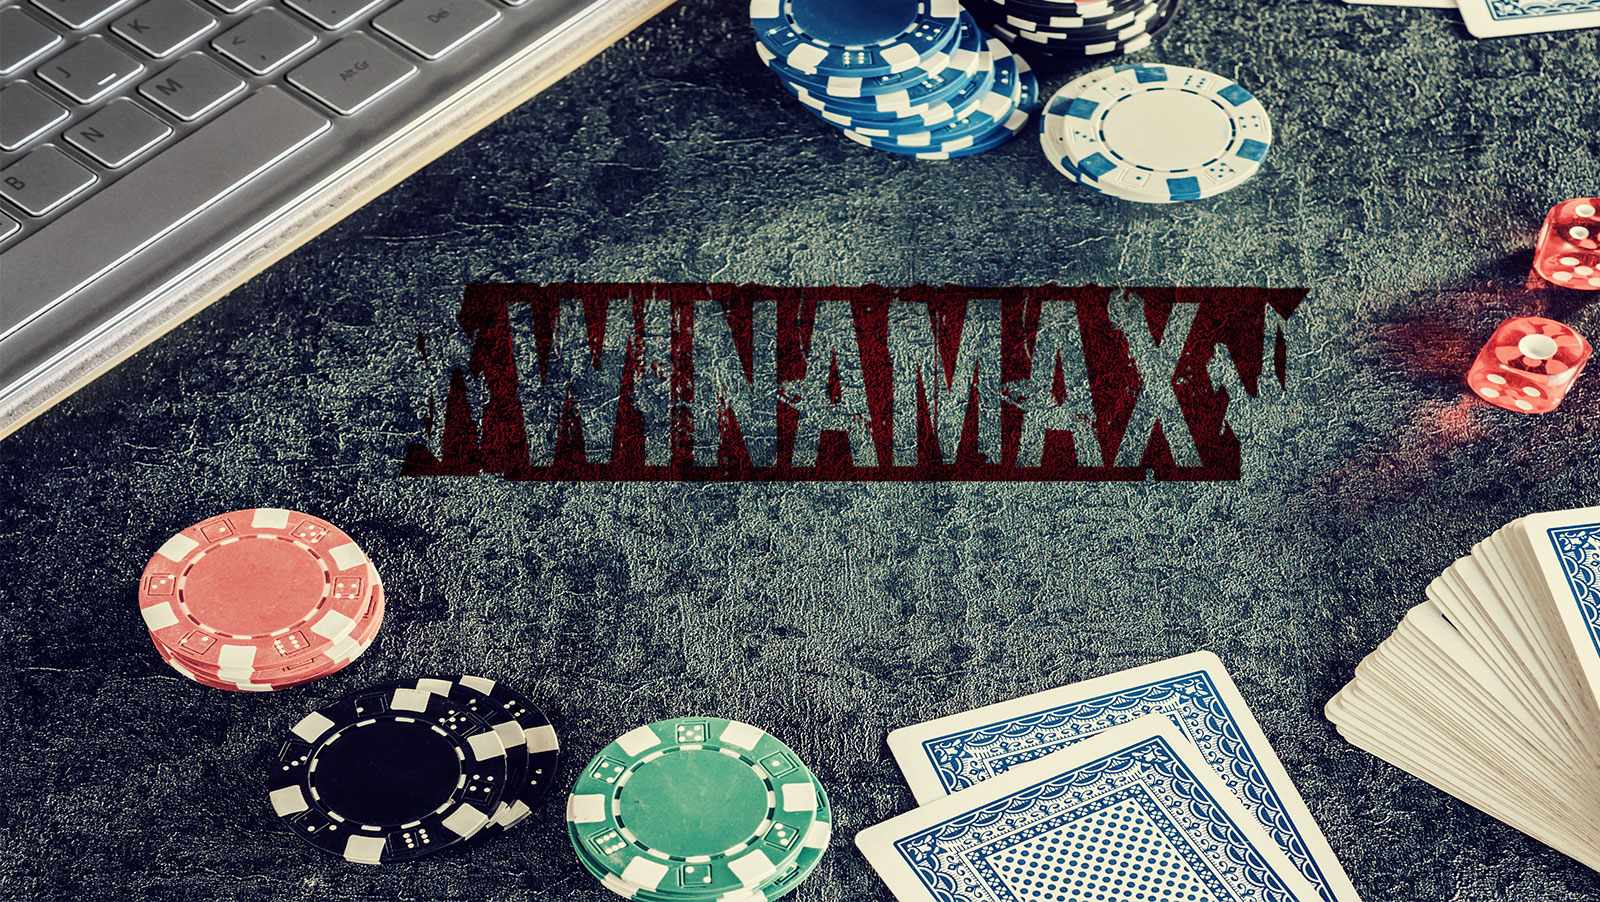 Winamax could jump into Franco-Spanish liquidity sharing by April